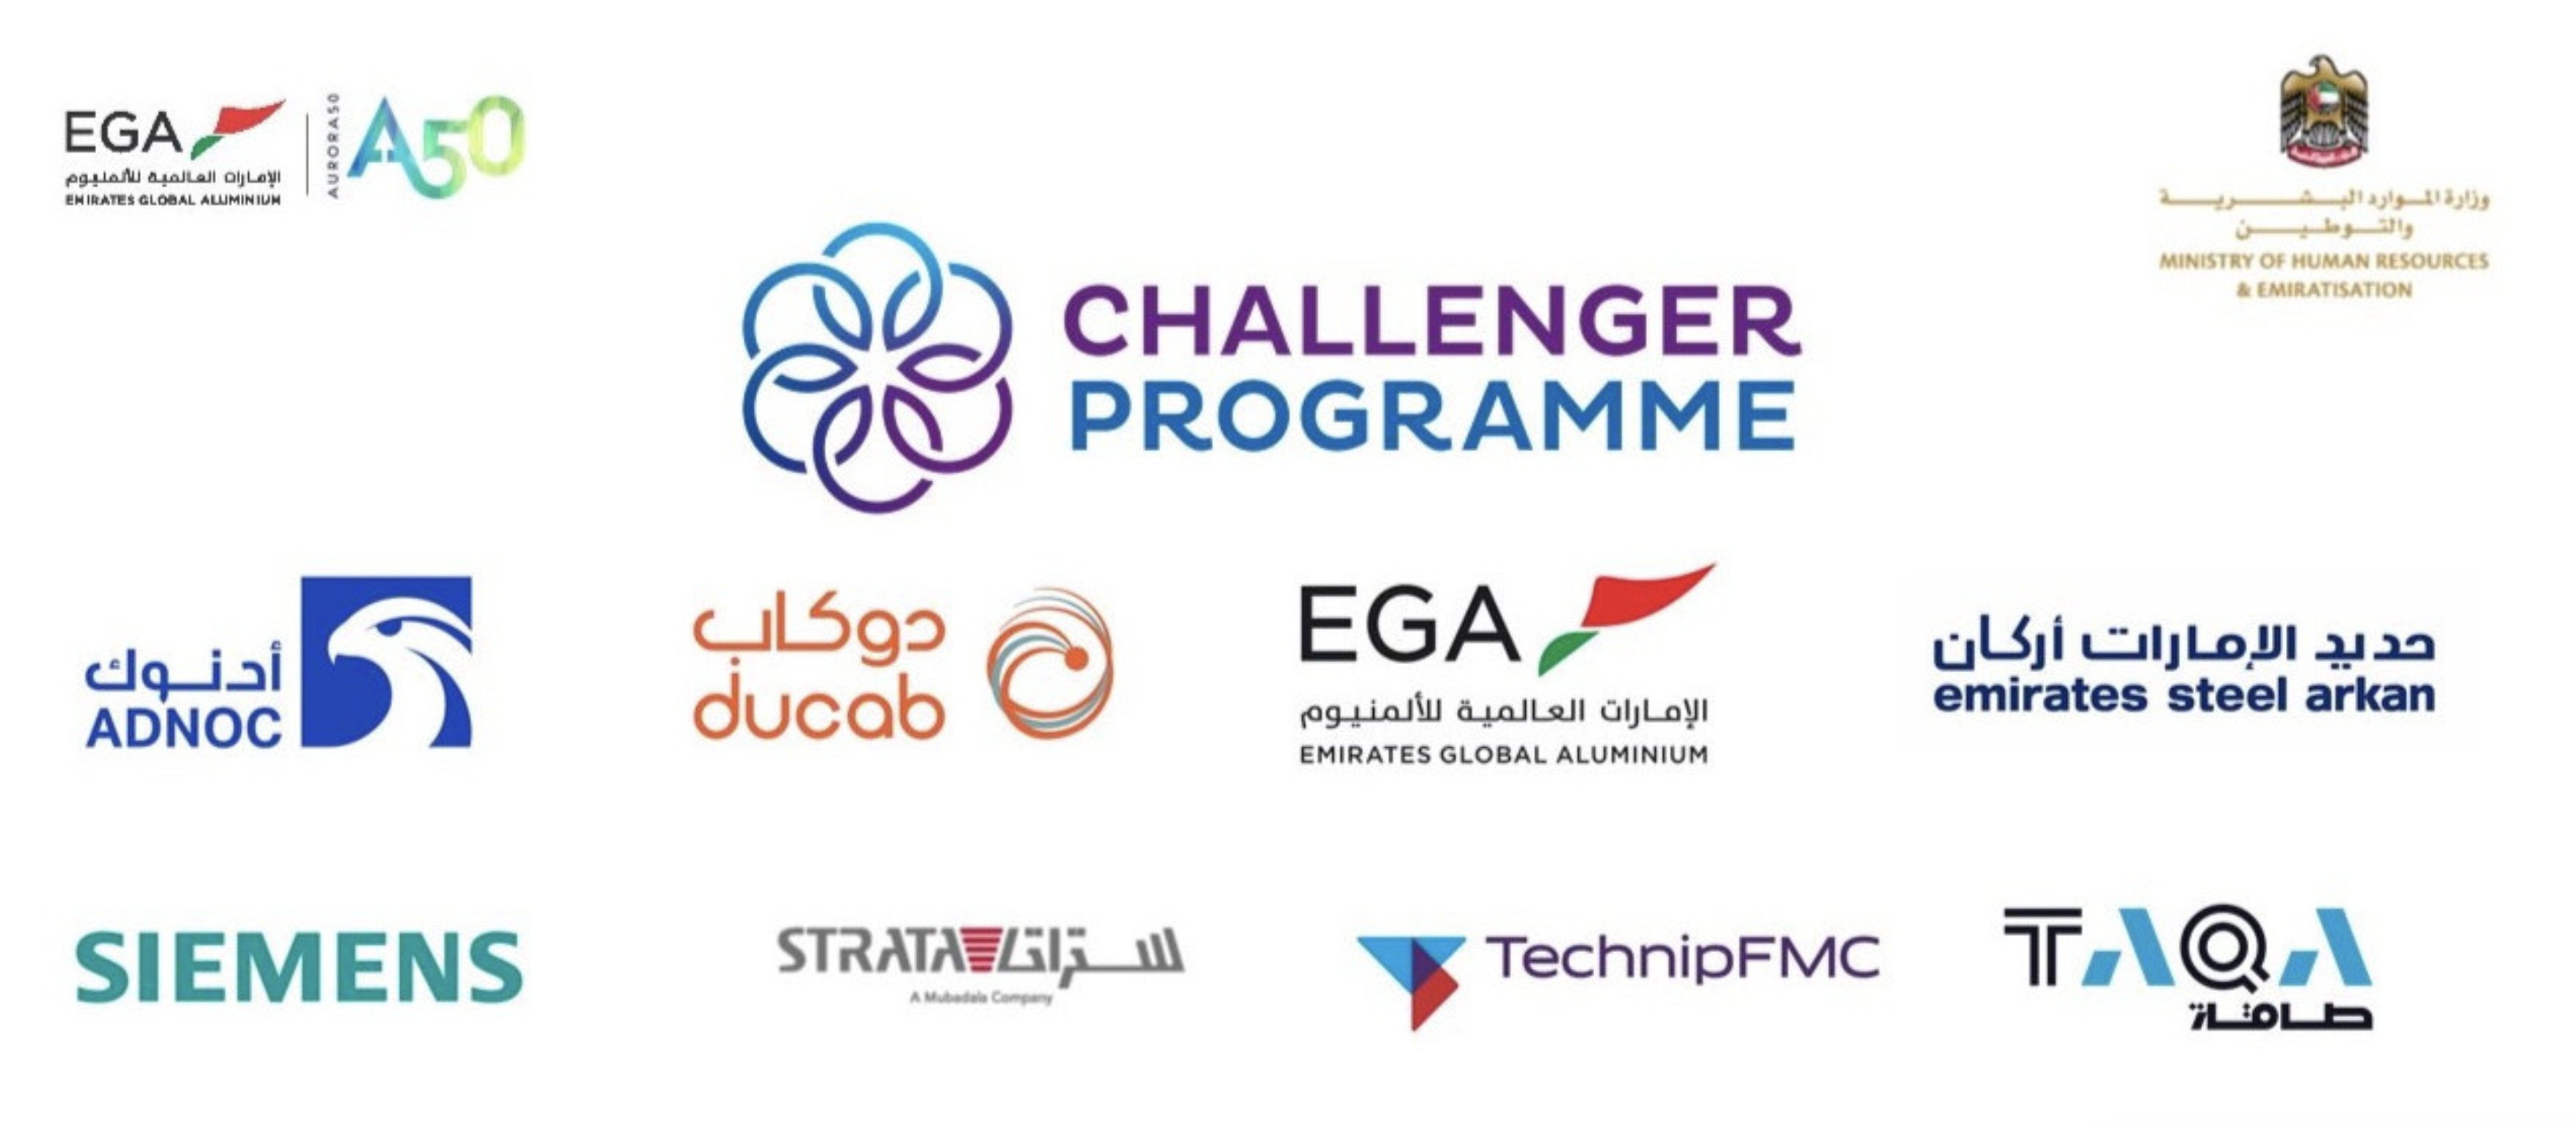 EGA & Aurora50 Challenger Programme for UAE industrial companies to further gender diversity - logos of initial signatory companies: ADNOC, Ducab, EGA, Emirates Steel Arkan, Siemens, Strata, TechnipFMC, TAQA, under patronage of Ministry of Human Resources & Emiratisation. Other logos in image are a combined image of EGA and Aurora50 and a logo for the Challenger Programe.